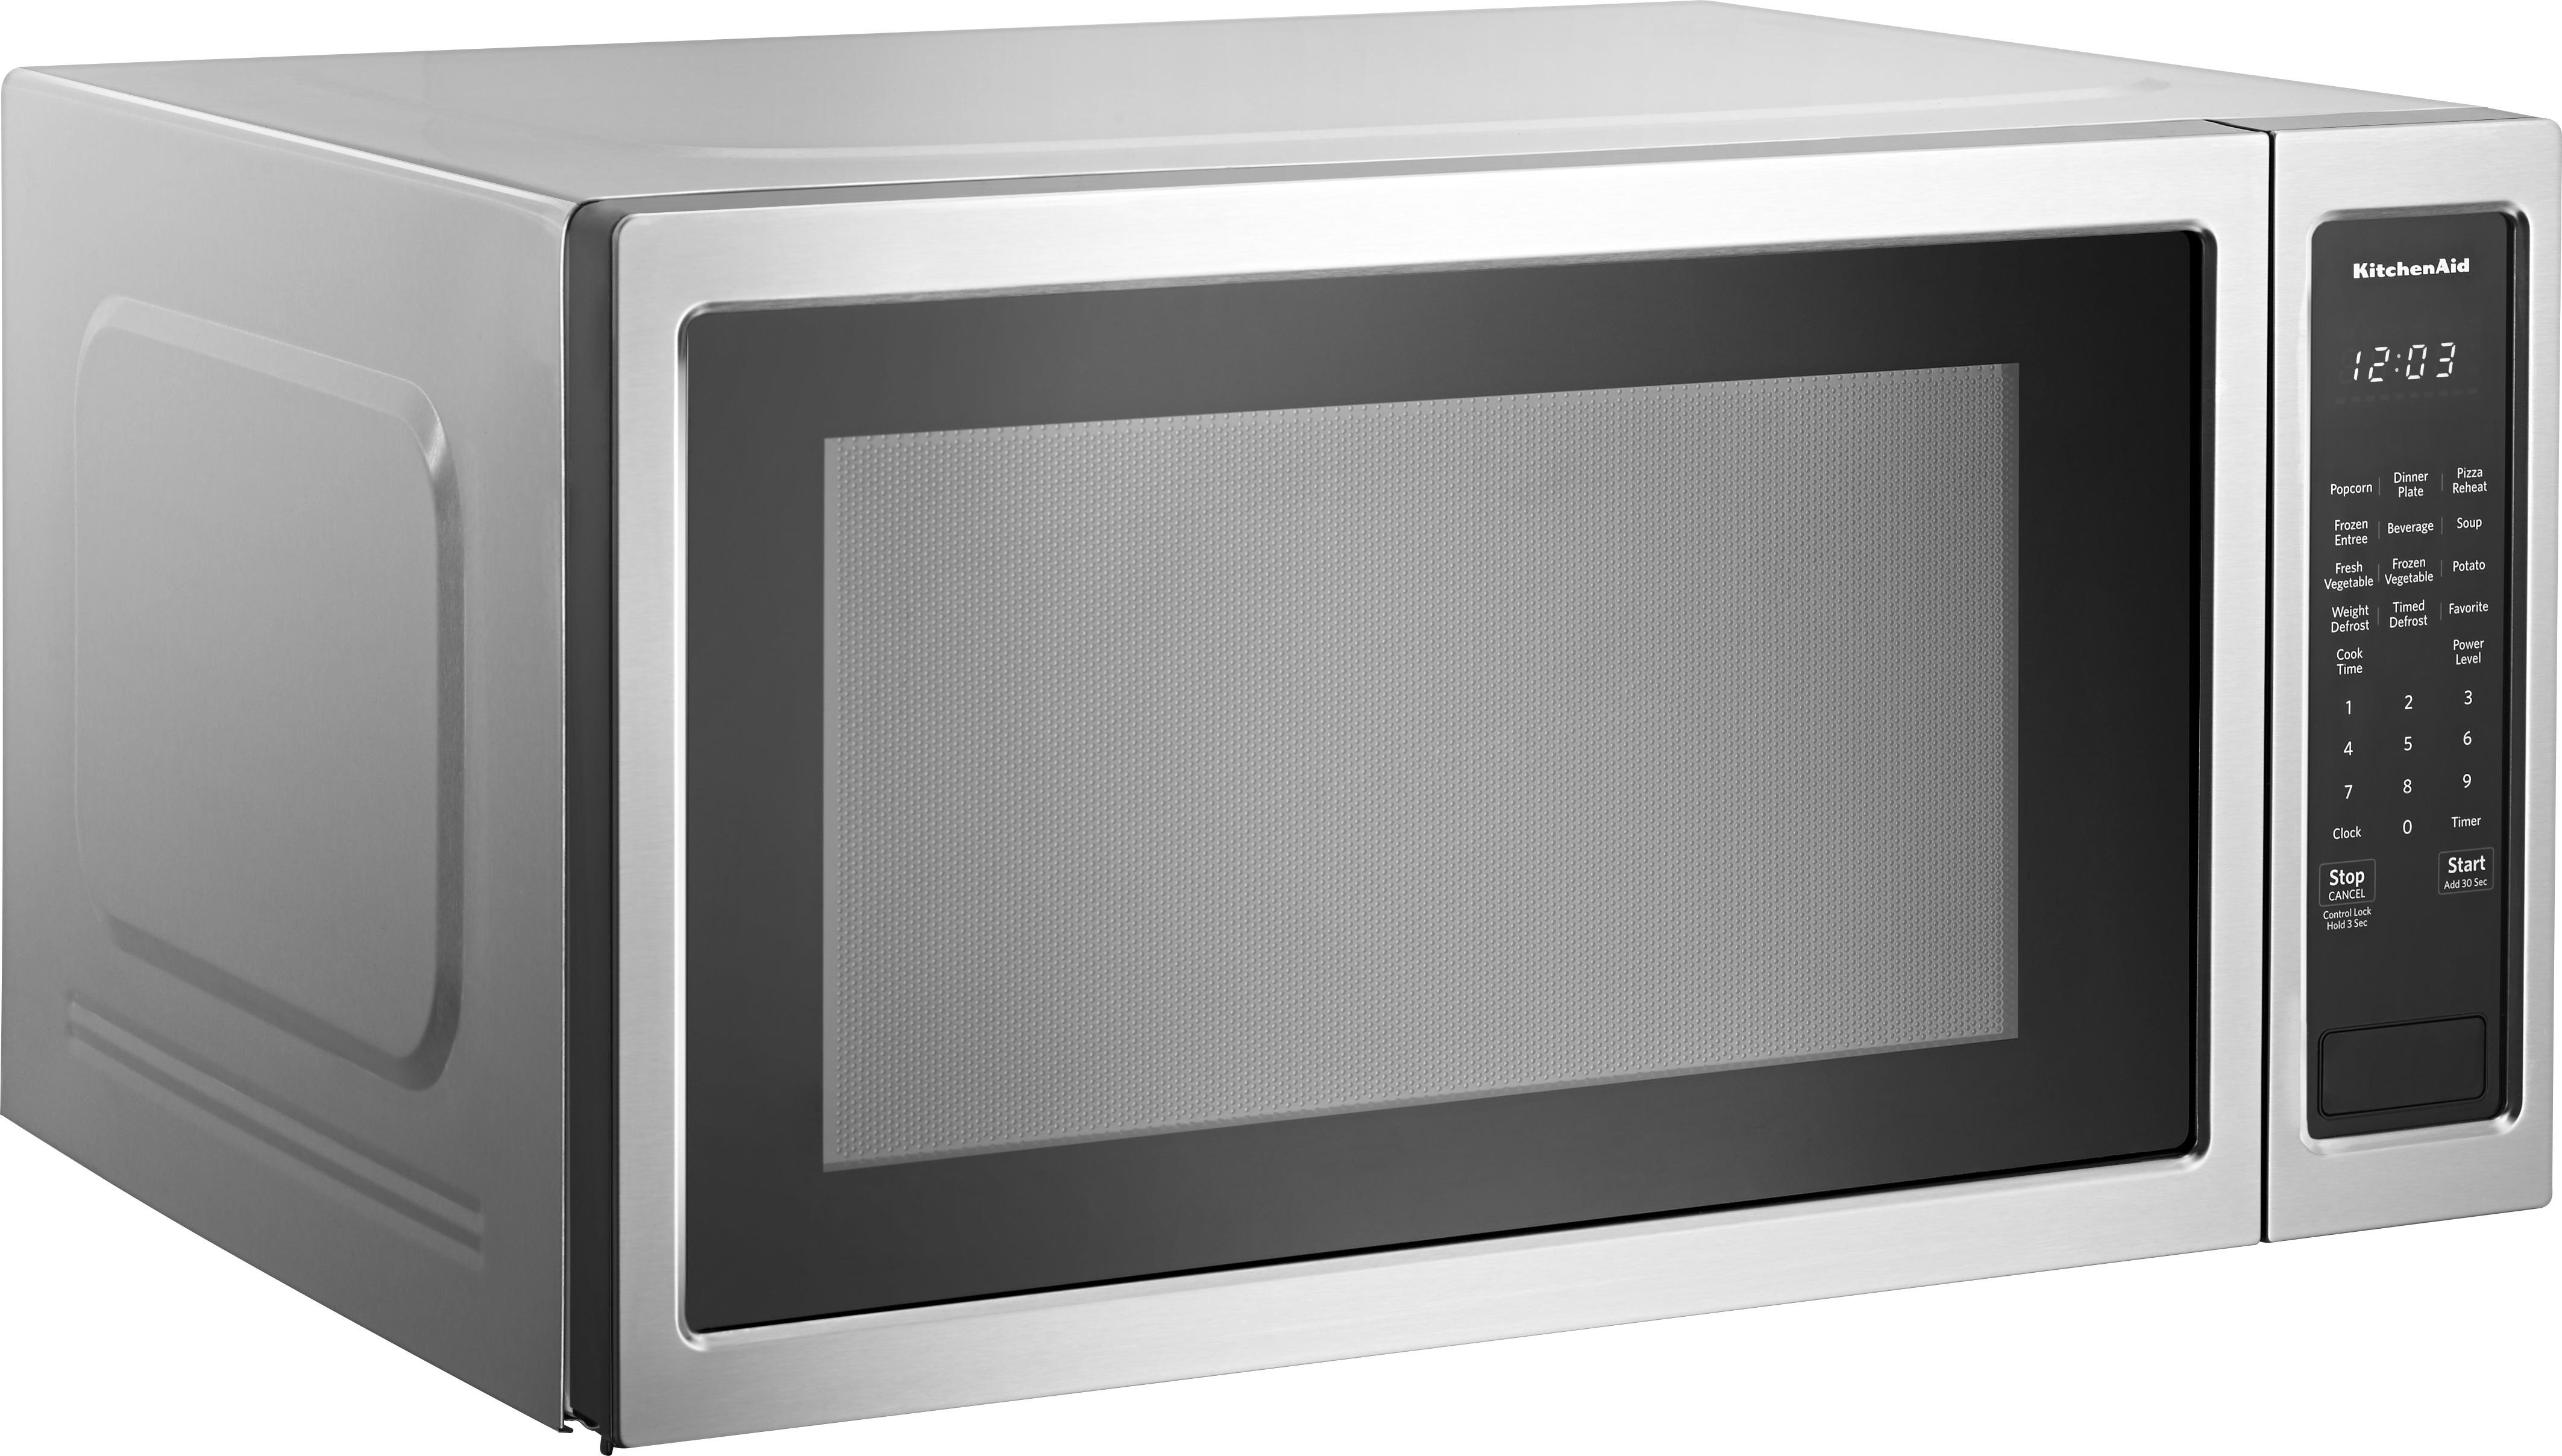 Angle View: KitchenAid - 2.2 Cu. Ft. Microwave with Sensor Cooking - Black stainless steel